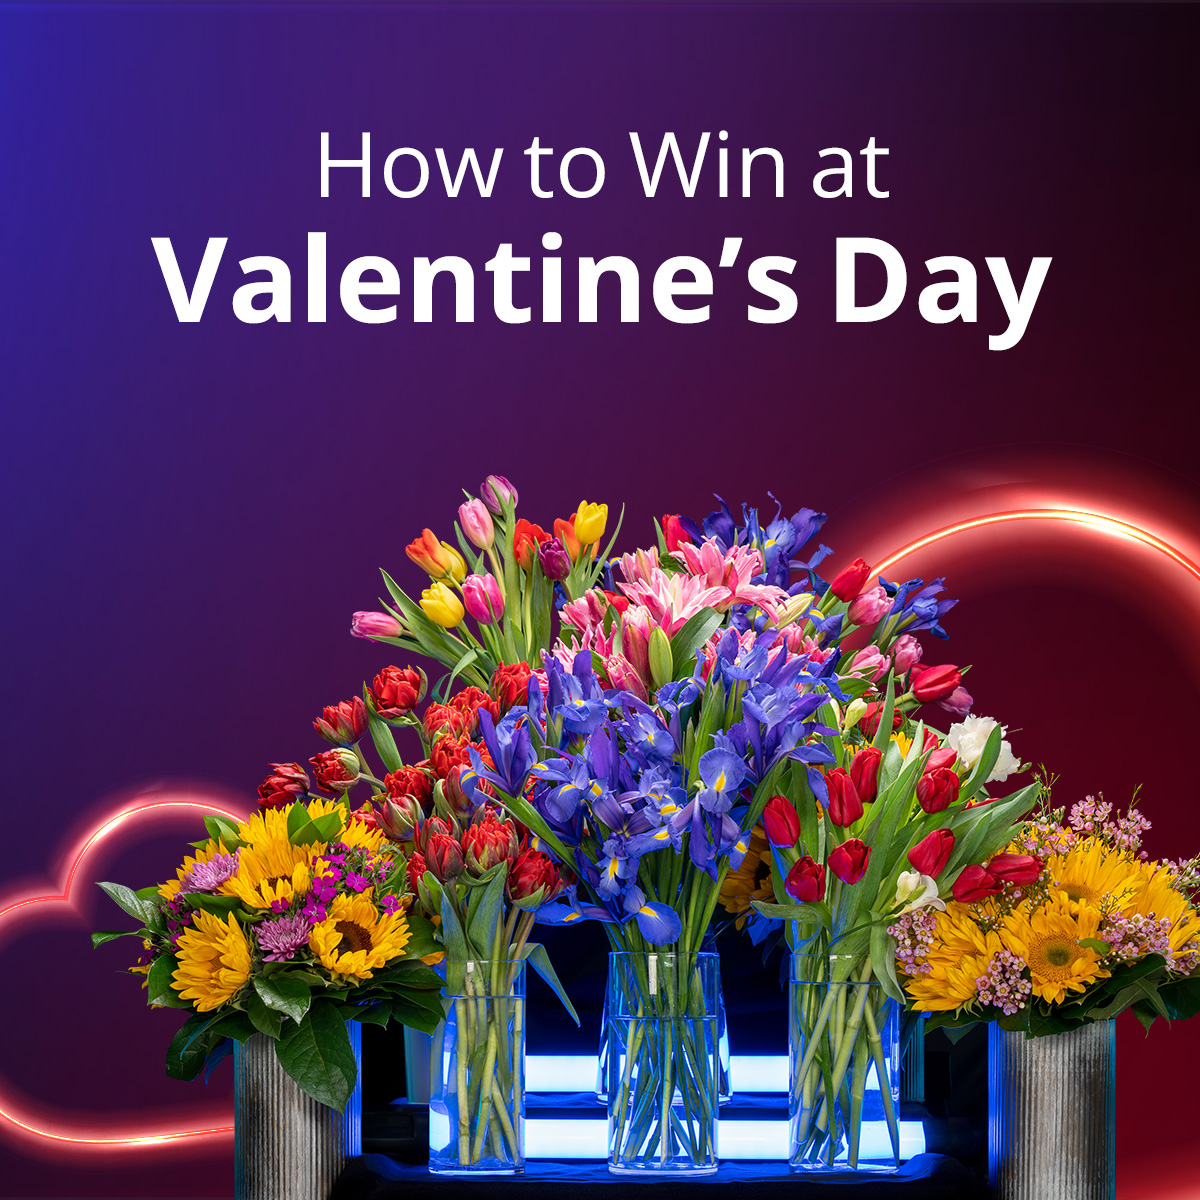 How to Win at Valentine's Day